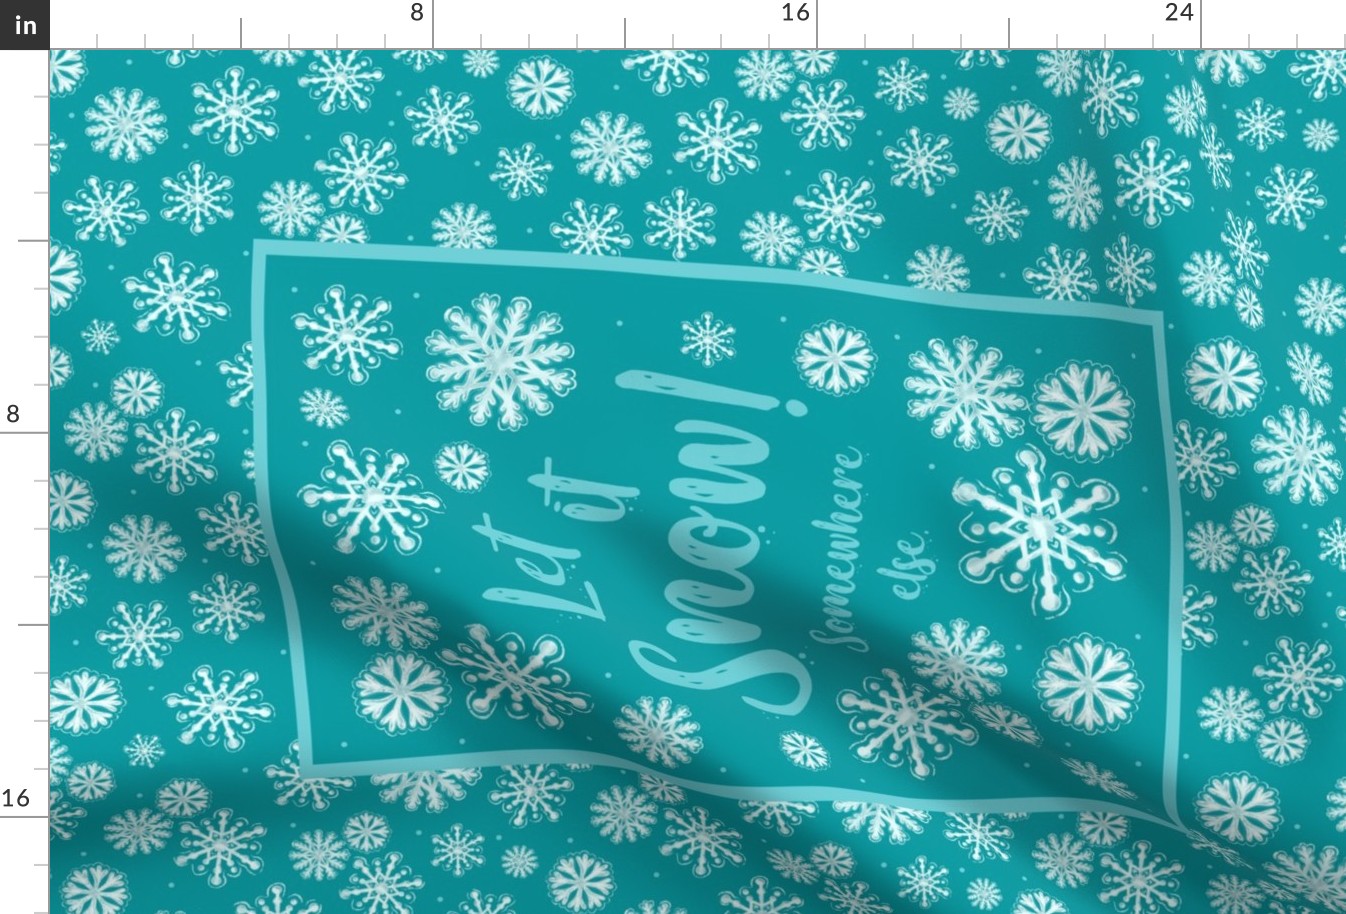 Large 27x18 Fat Quarter Panel for Tea Towel or Wall Art Hanging Let it Snow Somewhere Else Funny Sarcastic Winter Snowflake Humor